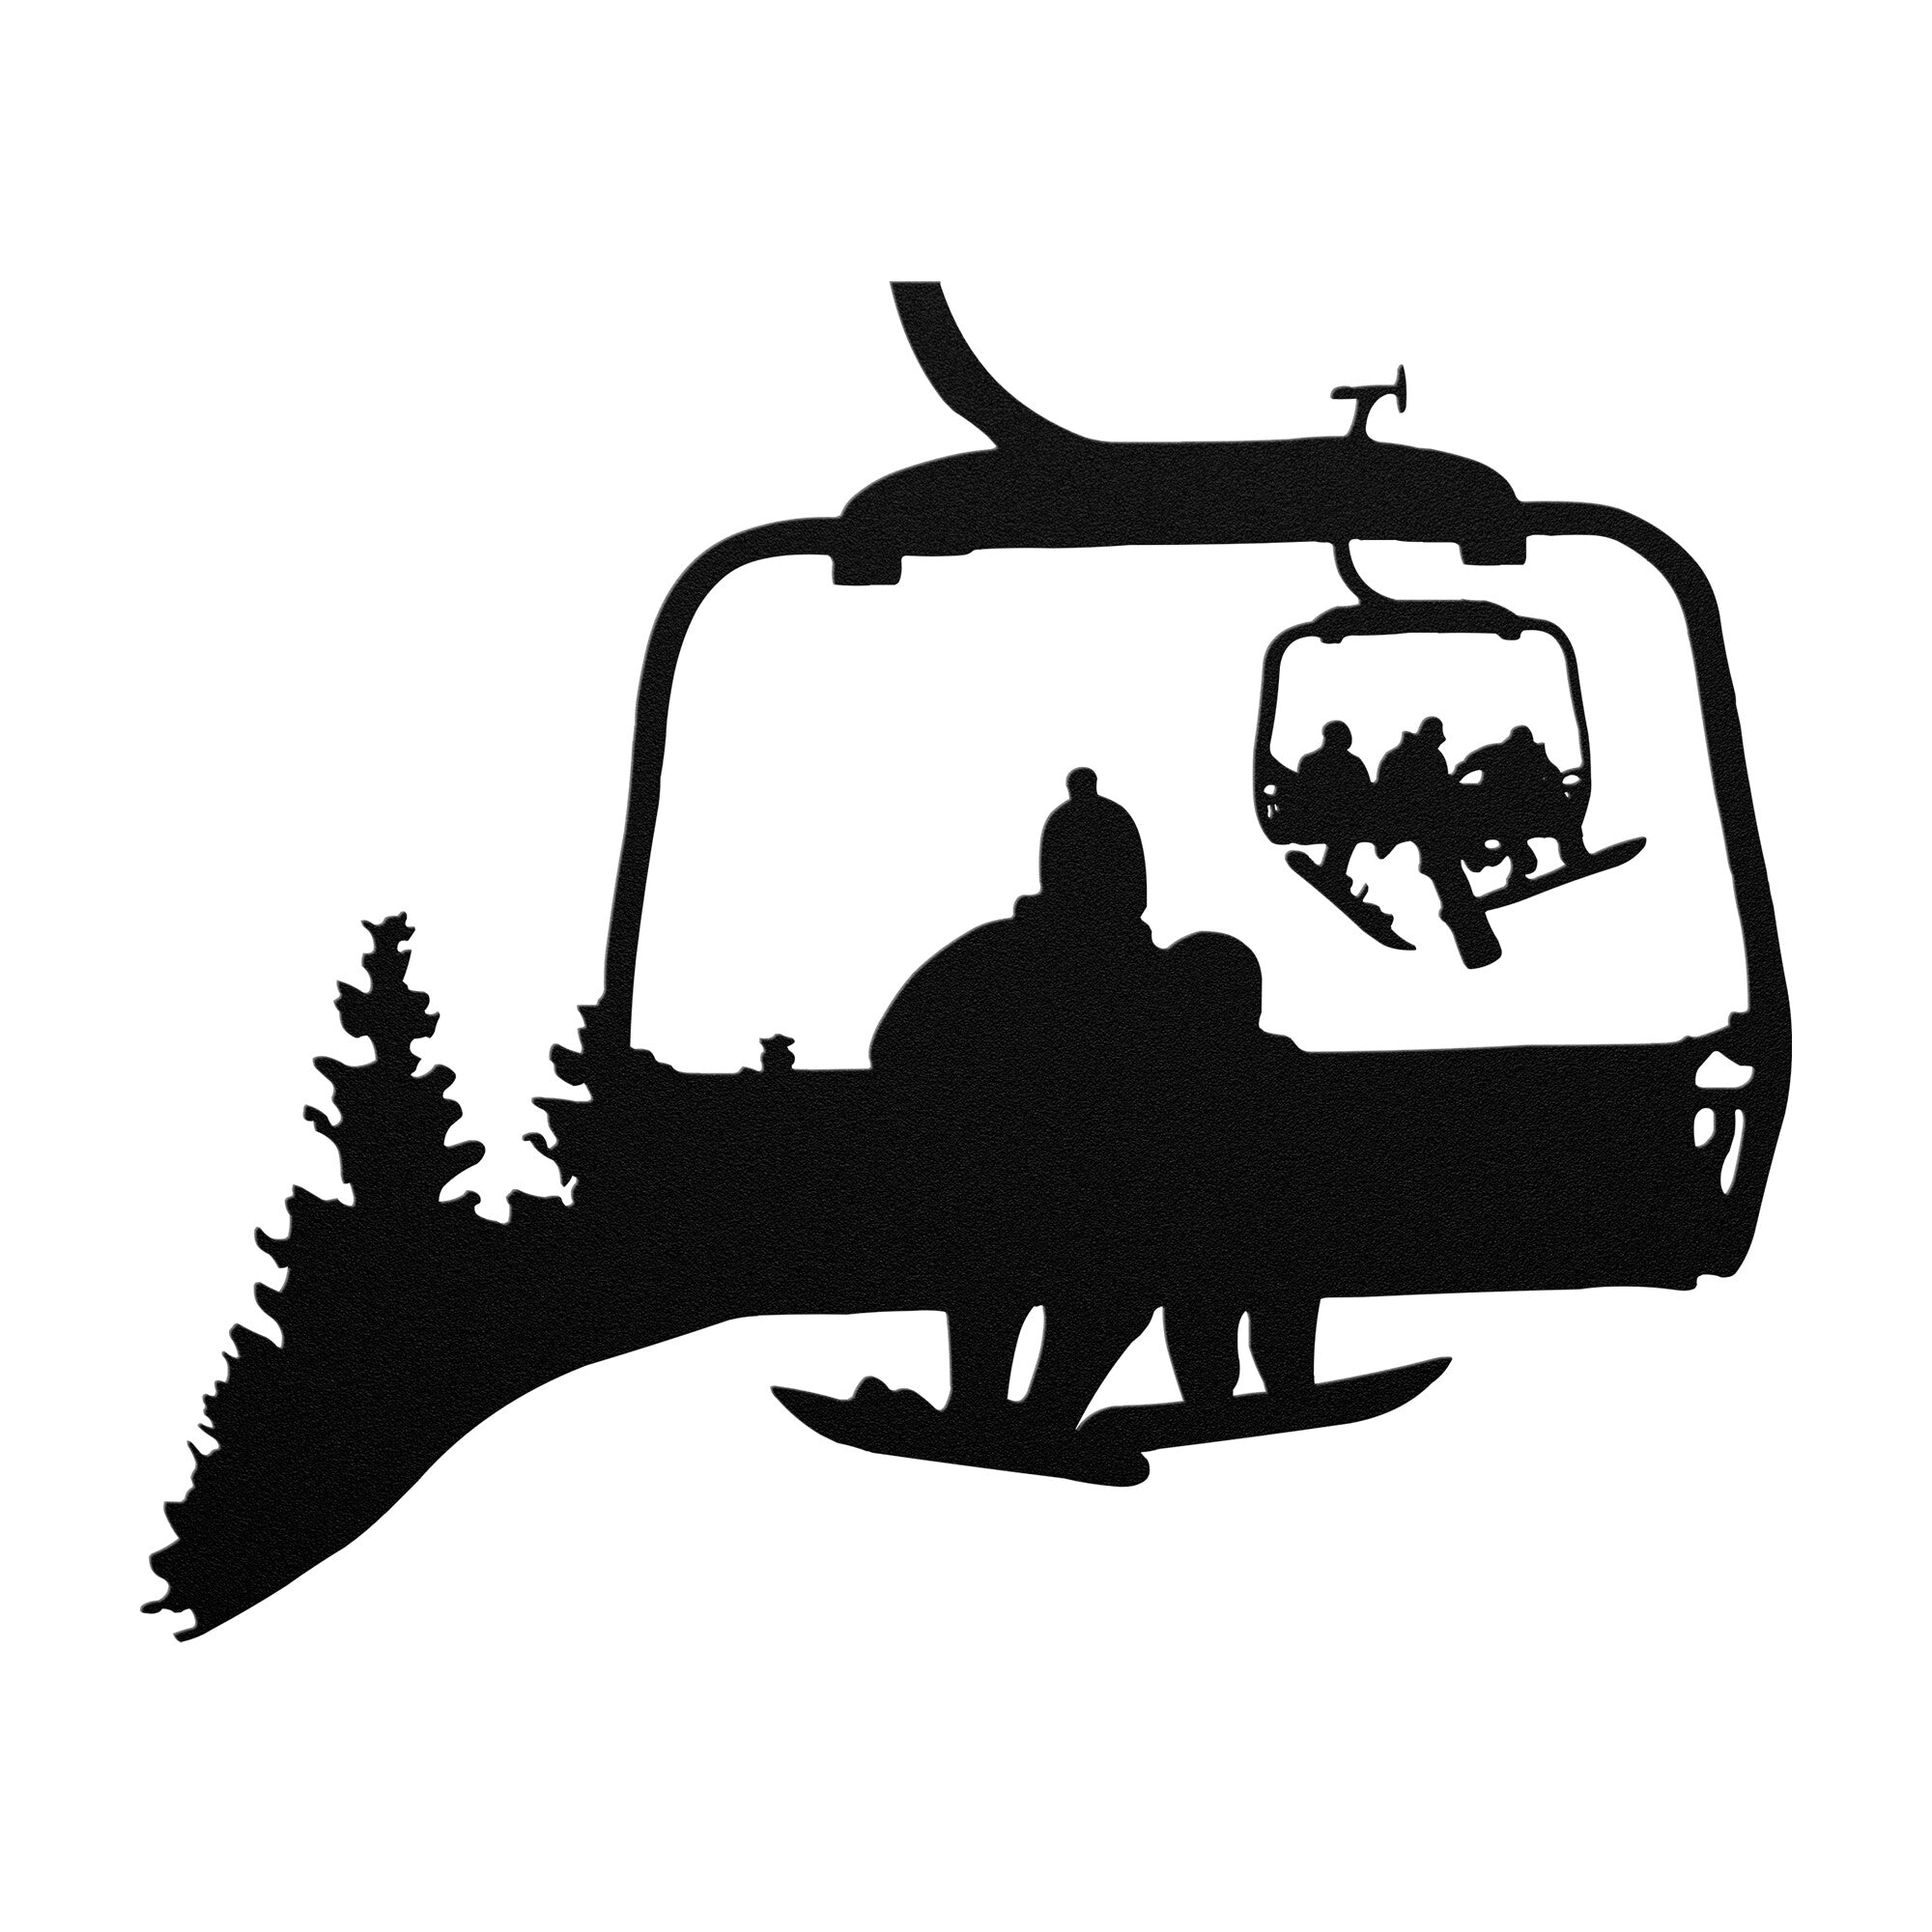 PERSONALIZED CHAIRLIFT SNOWBOARDING FAMILY METAL WALL ART 1 SNOWBOARDING MOM 1 SNOWBOARDING CHILD (🇺🇸 MADE IN THE USA)